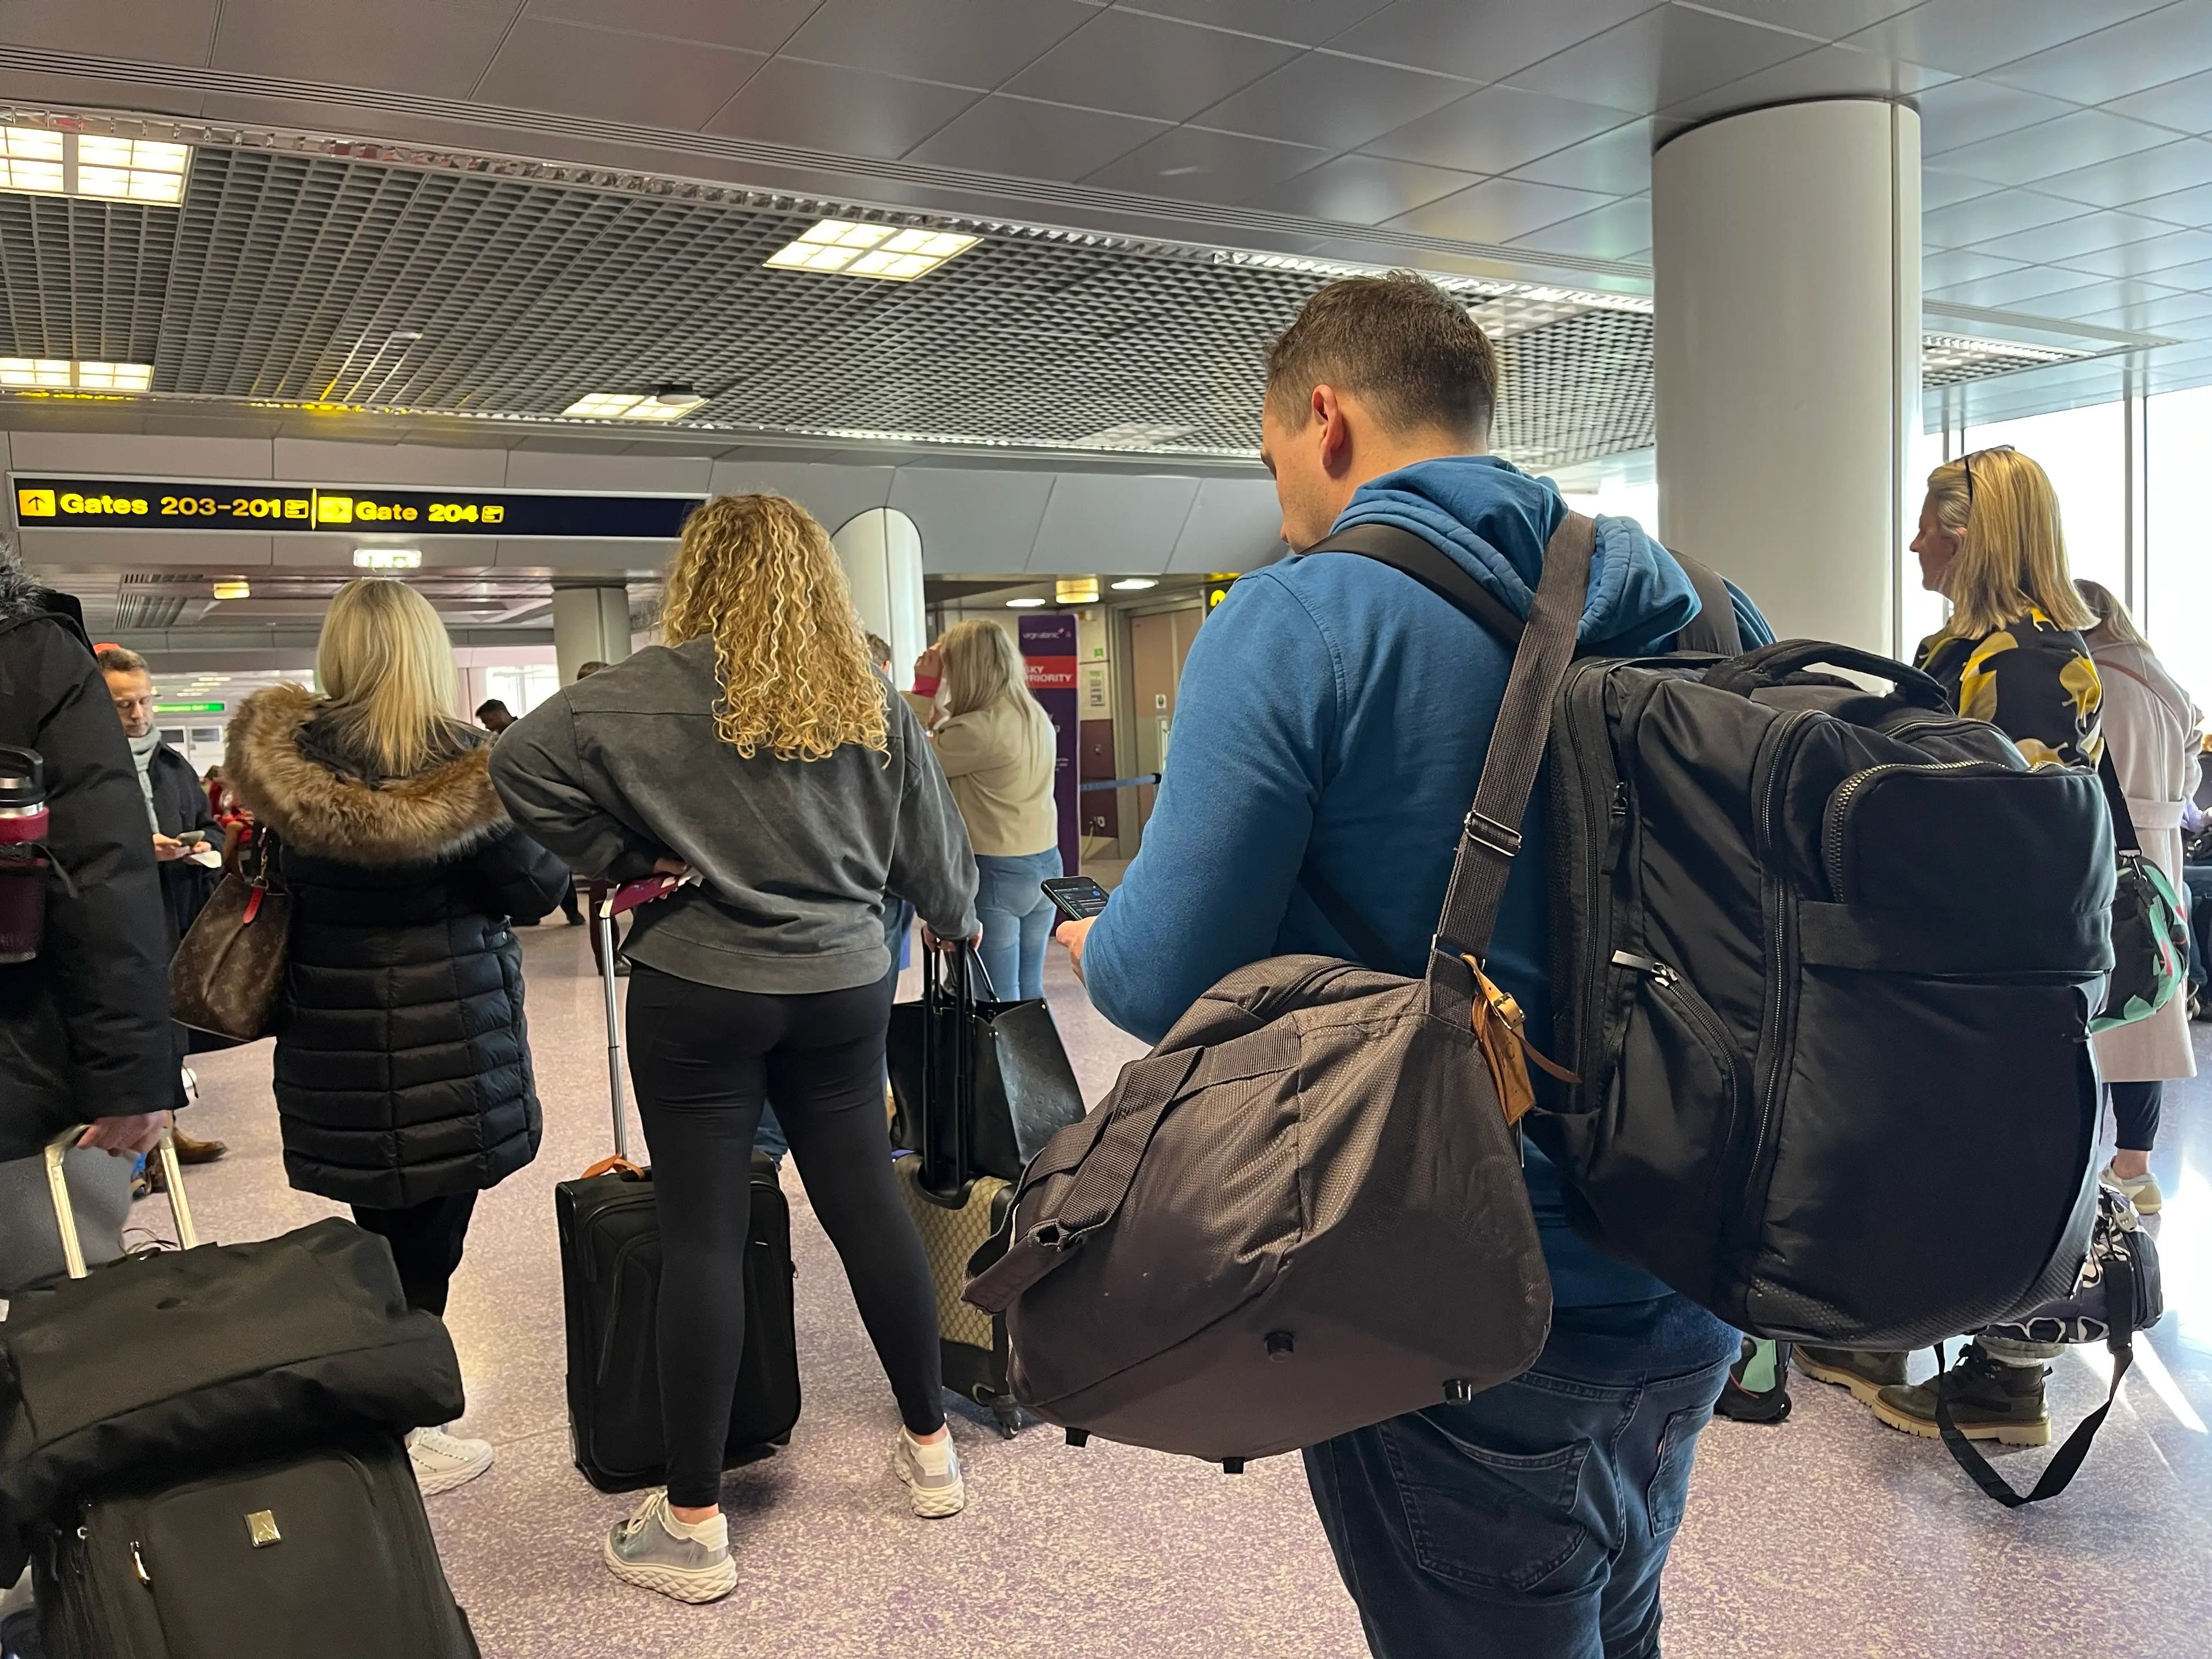 Line of people waiting to board Virgin Atlantic flight. Some passengers include a man in a blue hoodie, a woman with curly blonde hair in a gray sweatshirt, and a woman with a black puffer jacket